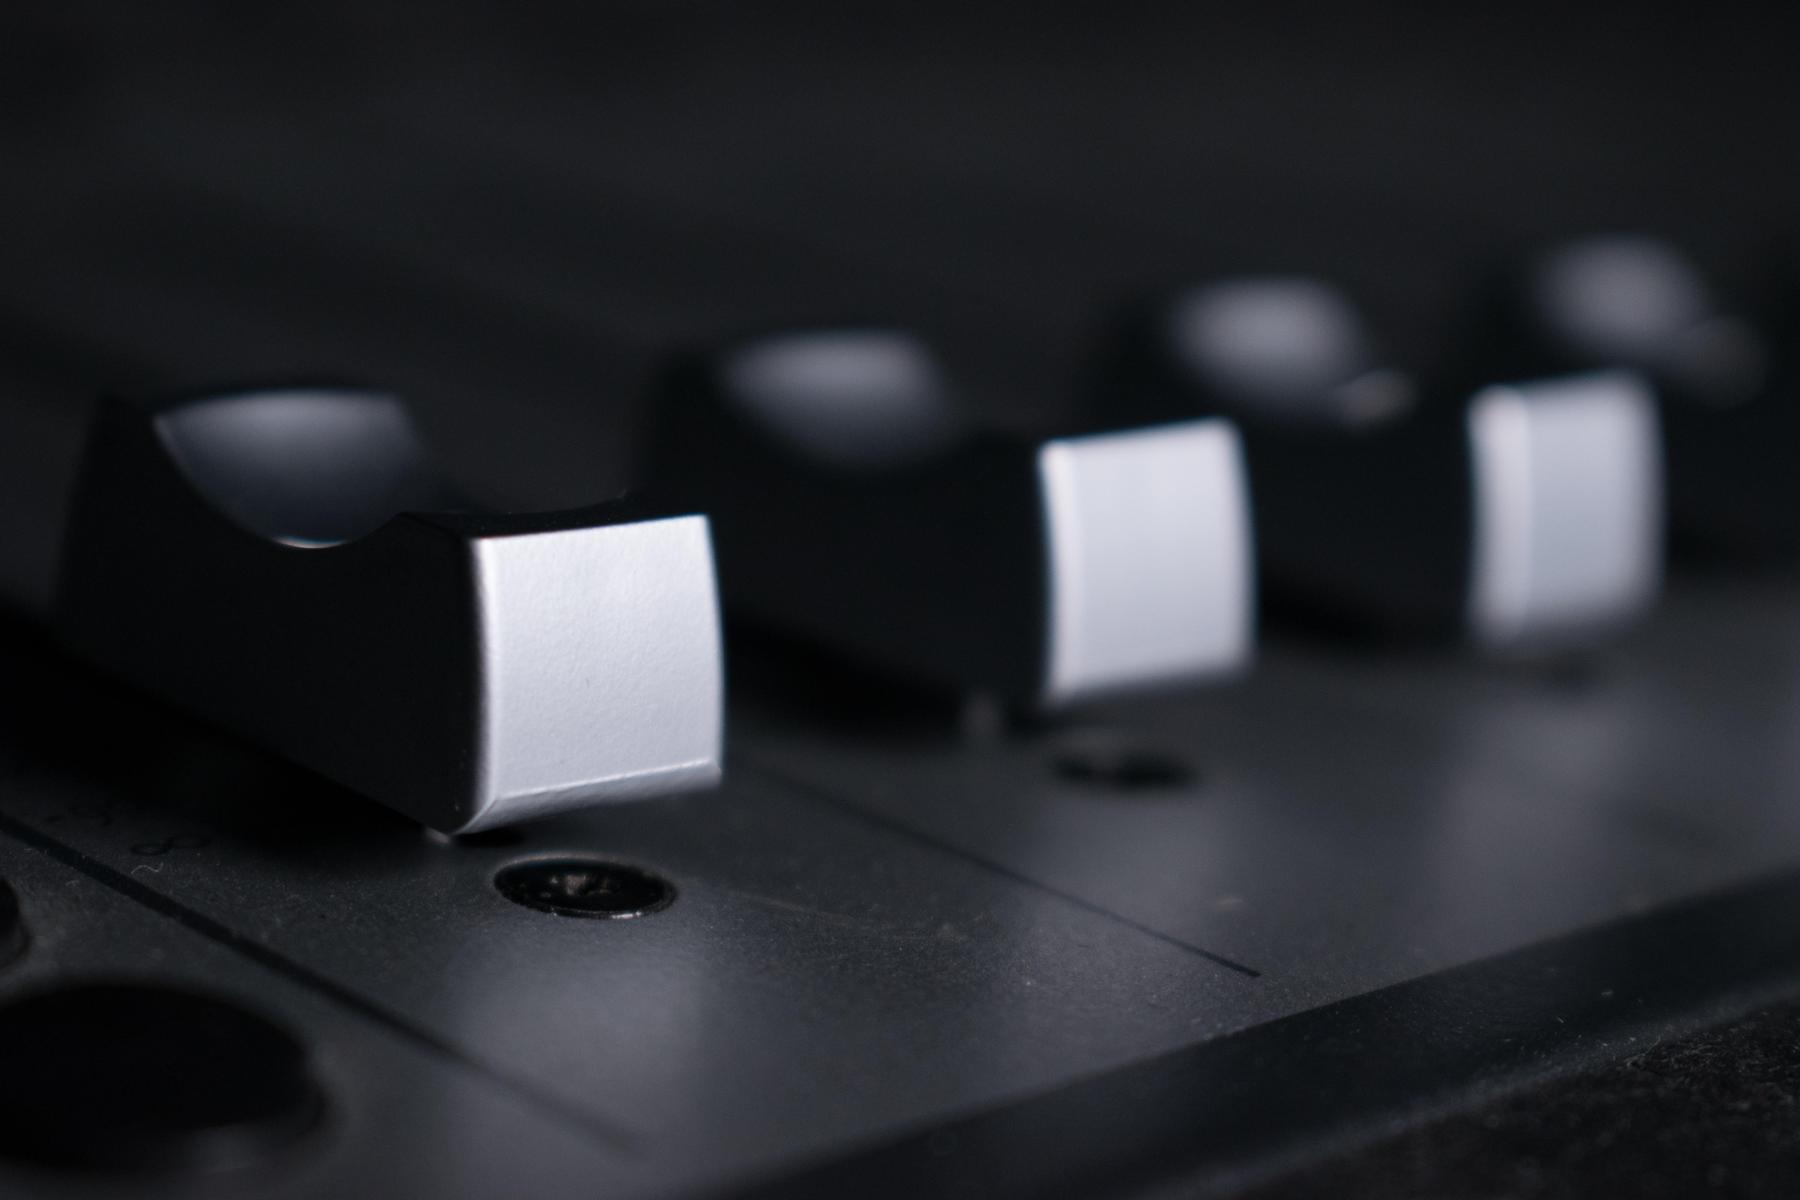 Music Production Keyboard 101: The Basics You Need to Know